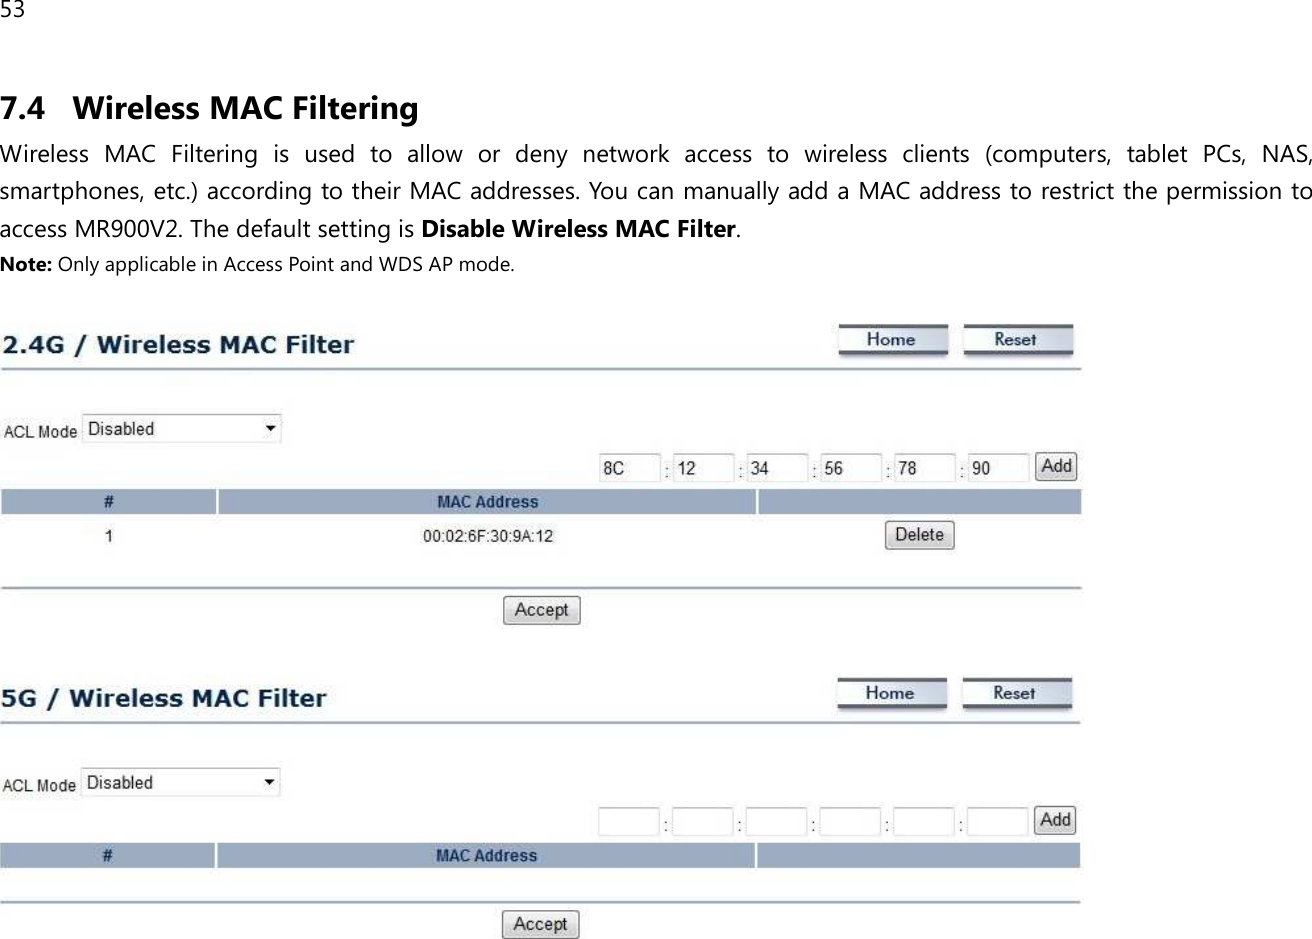 53  7.4 Wireless MAC Filtering Wireless  MAC  Filtering  is  used  to  allow  or  deny  network  access  to  wireless  clients  (computers,  tablet  PCs,  NAS, smartphones, etc.) according to their MAC addresses. You can manually add a MAC address to restrict the permission to access MR900V2. The default setting is Disable Wireless MAC Filter. Note: Only applicable in Access Point and WDS AP mode.      